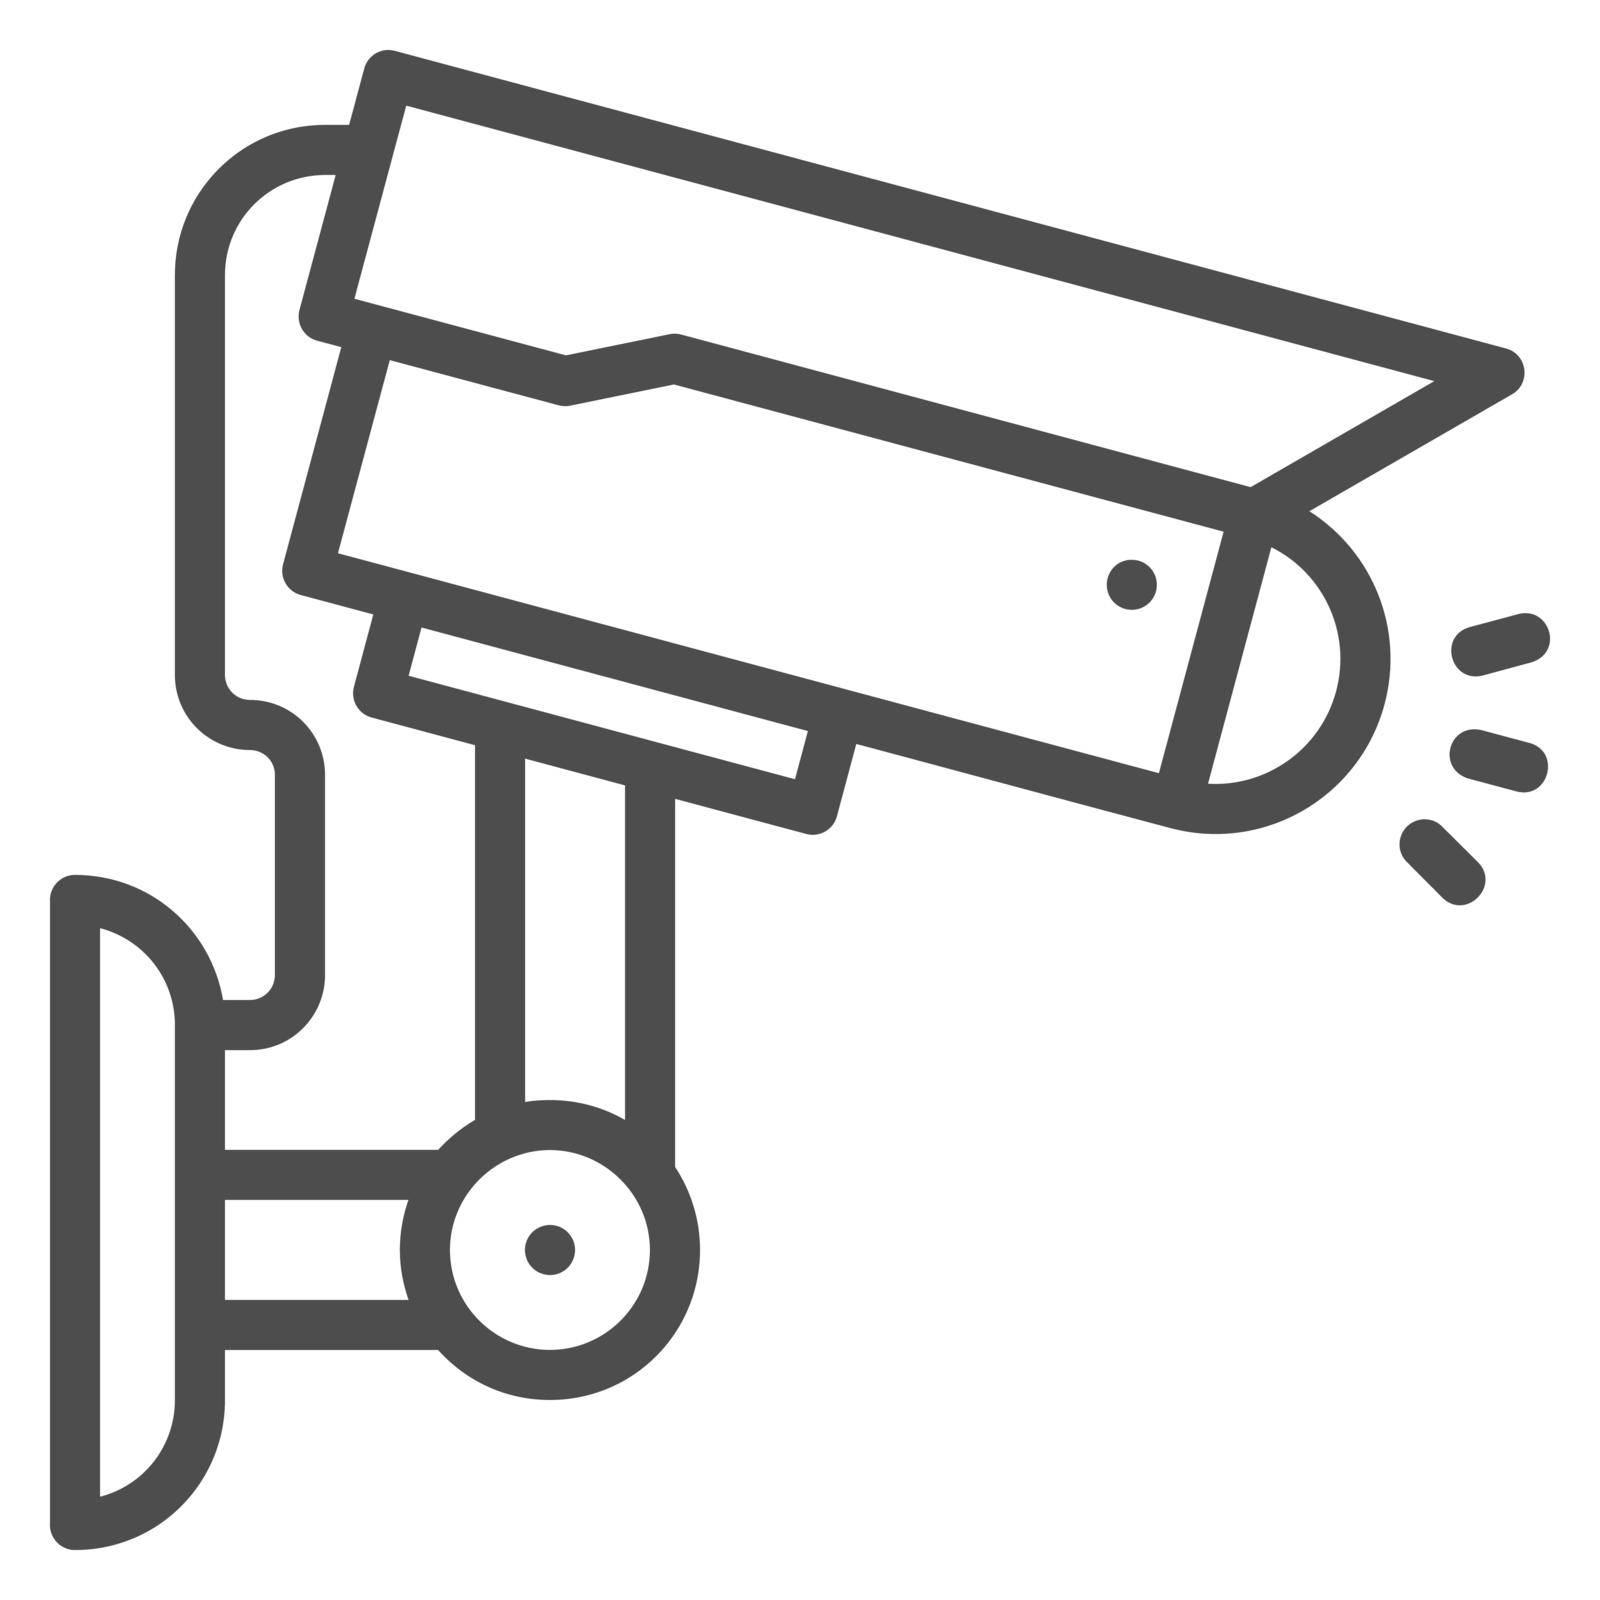 Cctv icon design outline style by Aficons